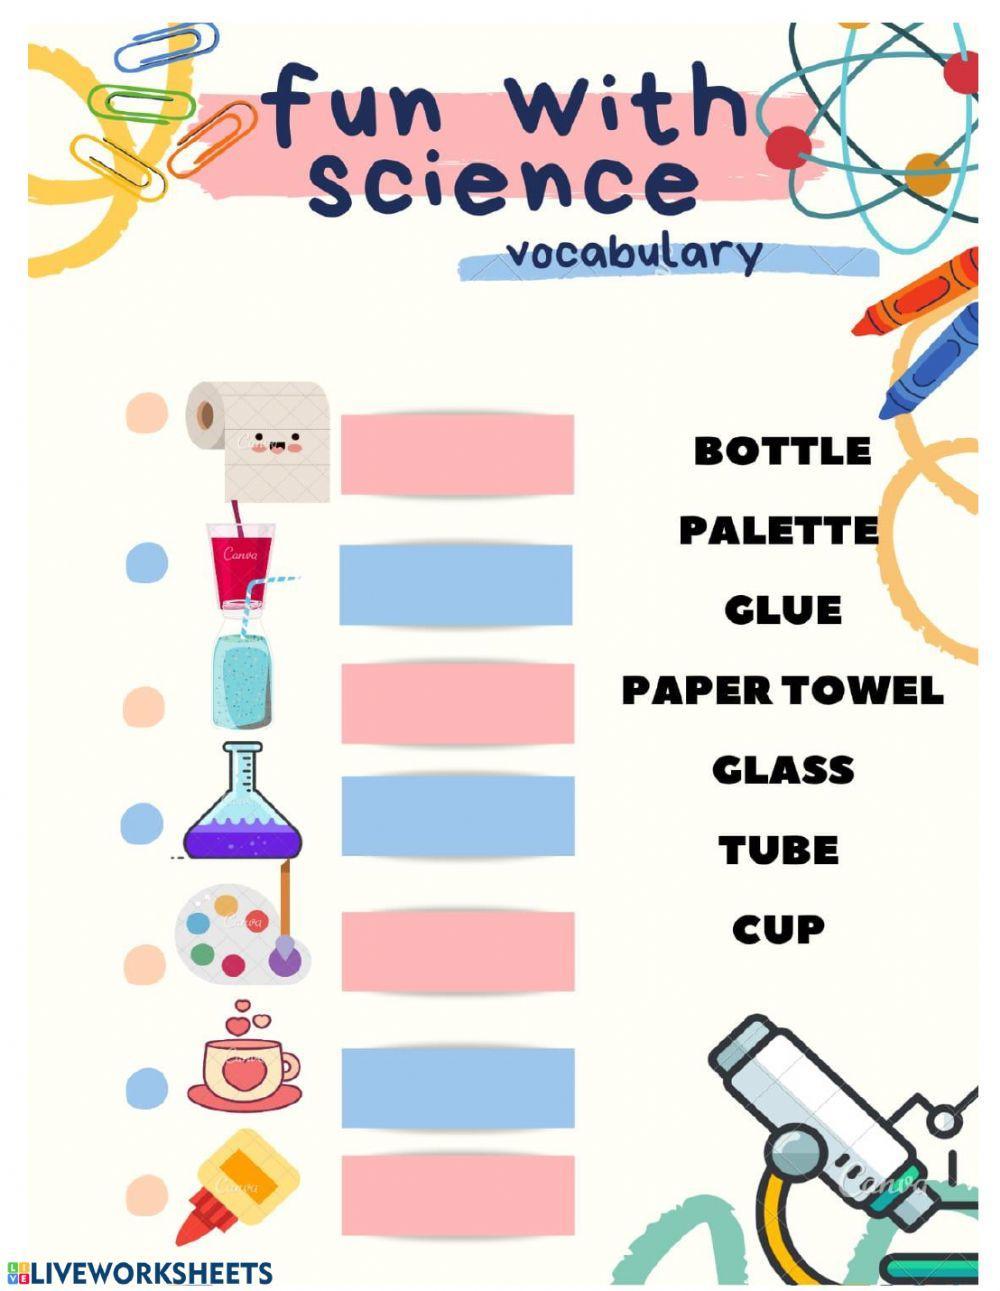 Fun with science vocabulary